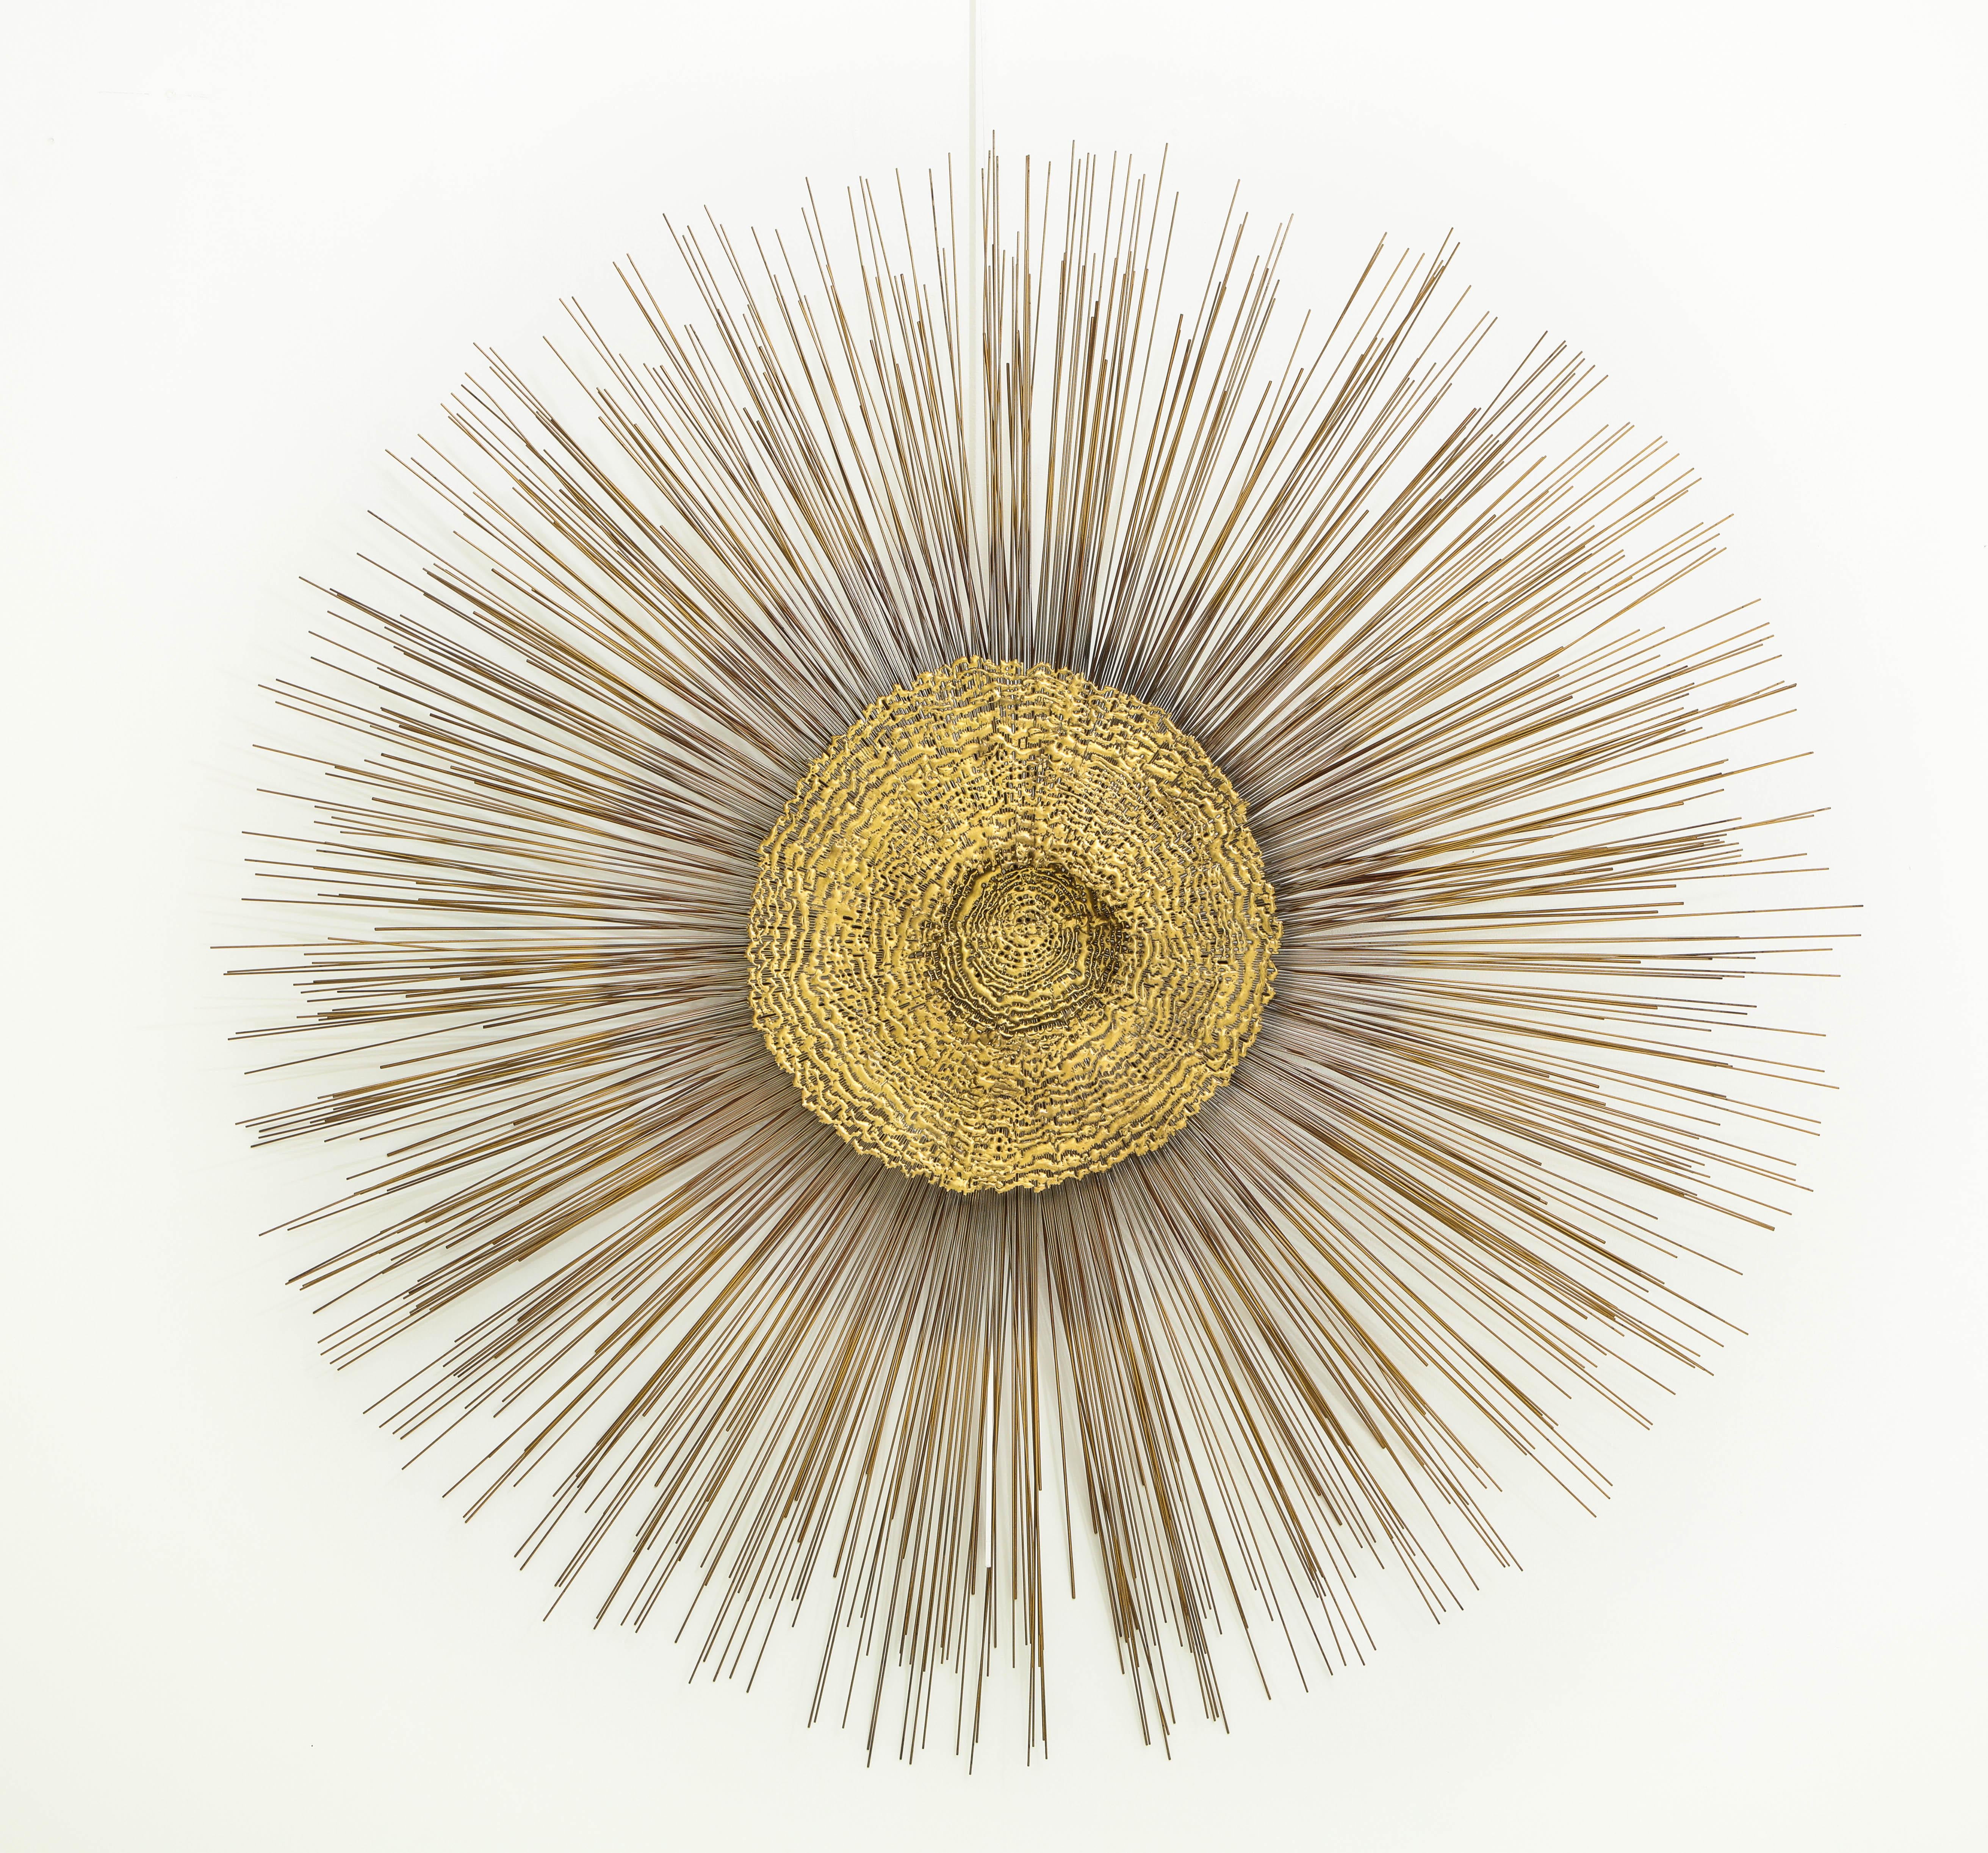 Giant 1970s Brutalist wall sculpture by Curtis Jere.
The sculpture features a circular abstract design on top of radiating brass rods of varying lengths.